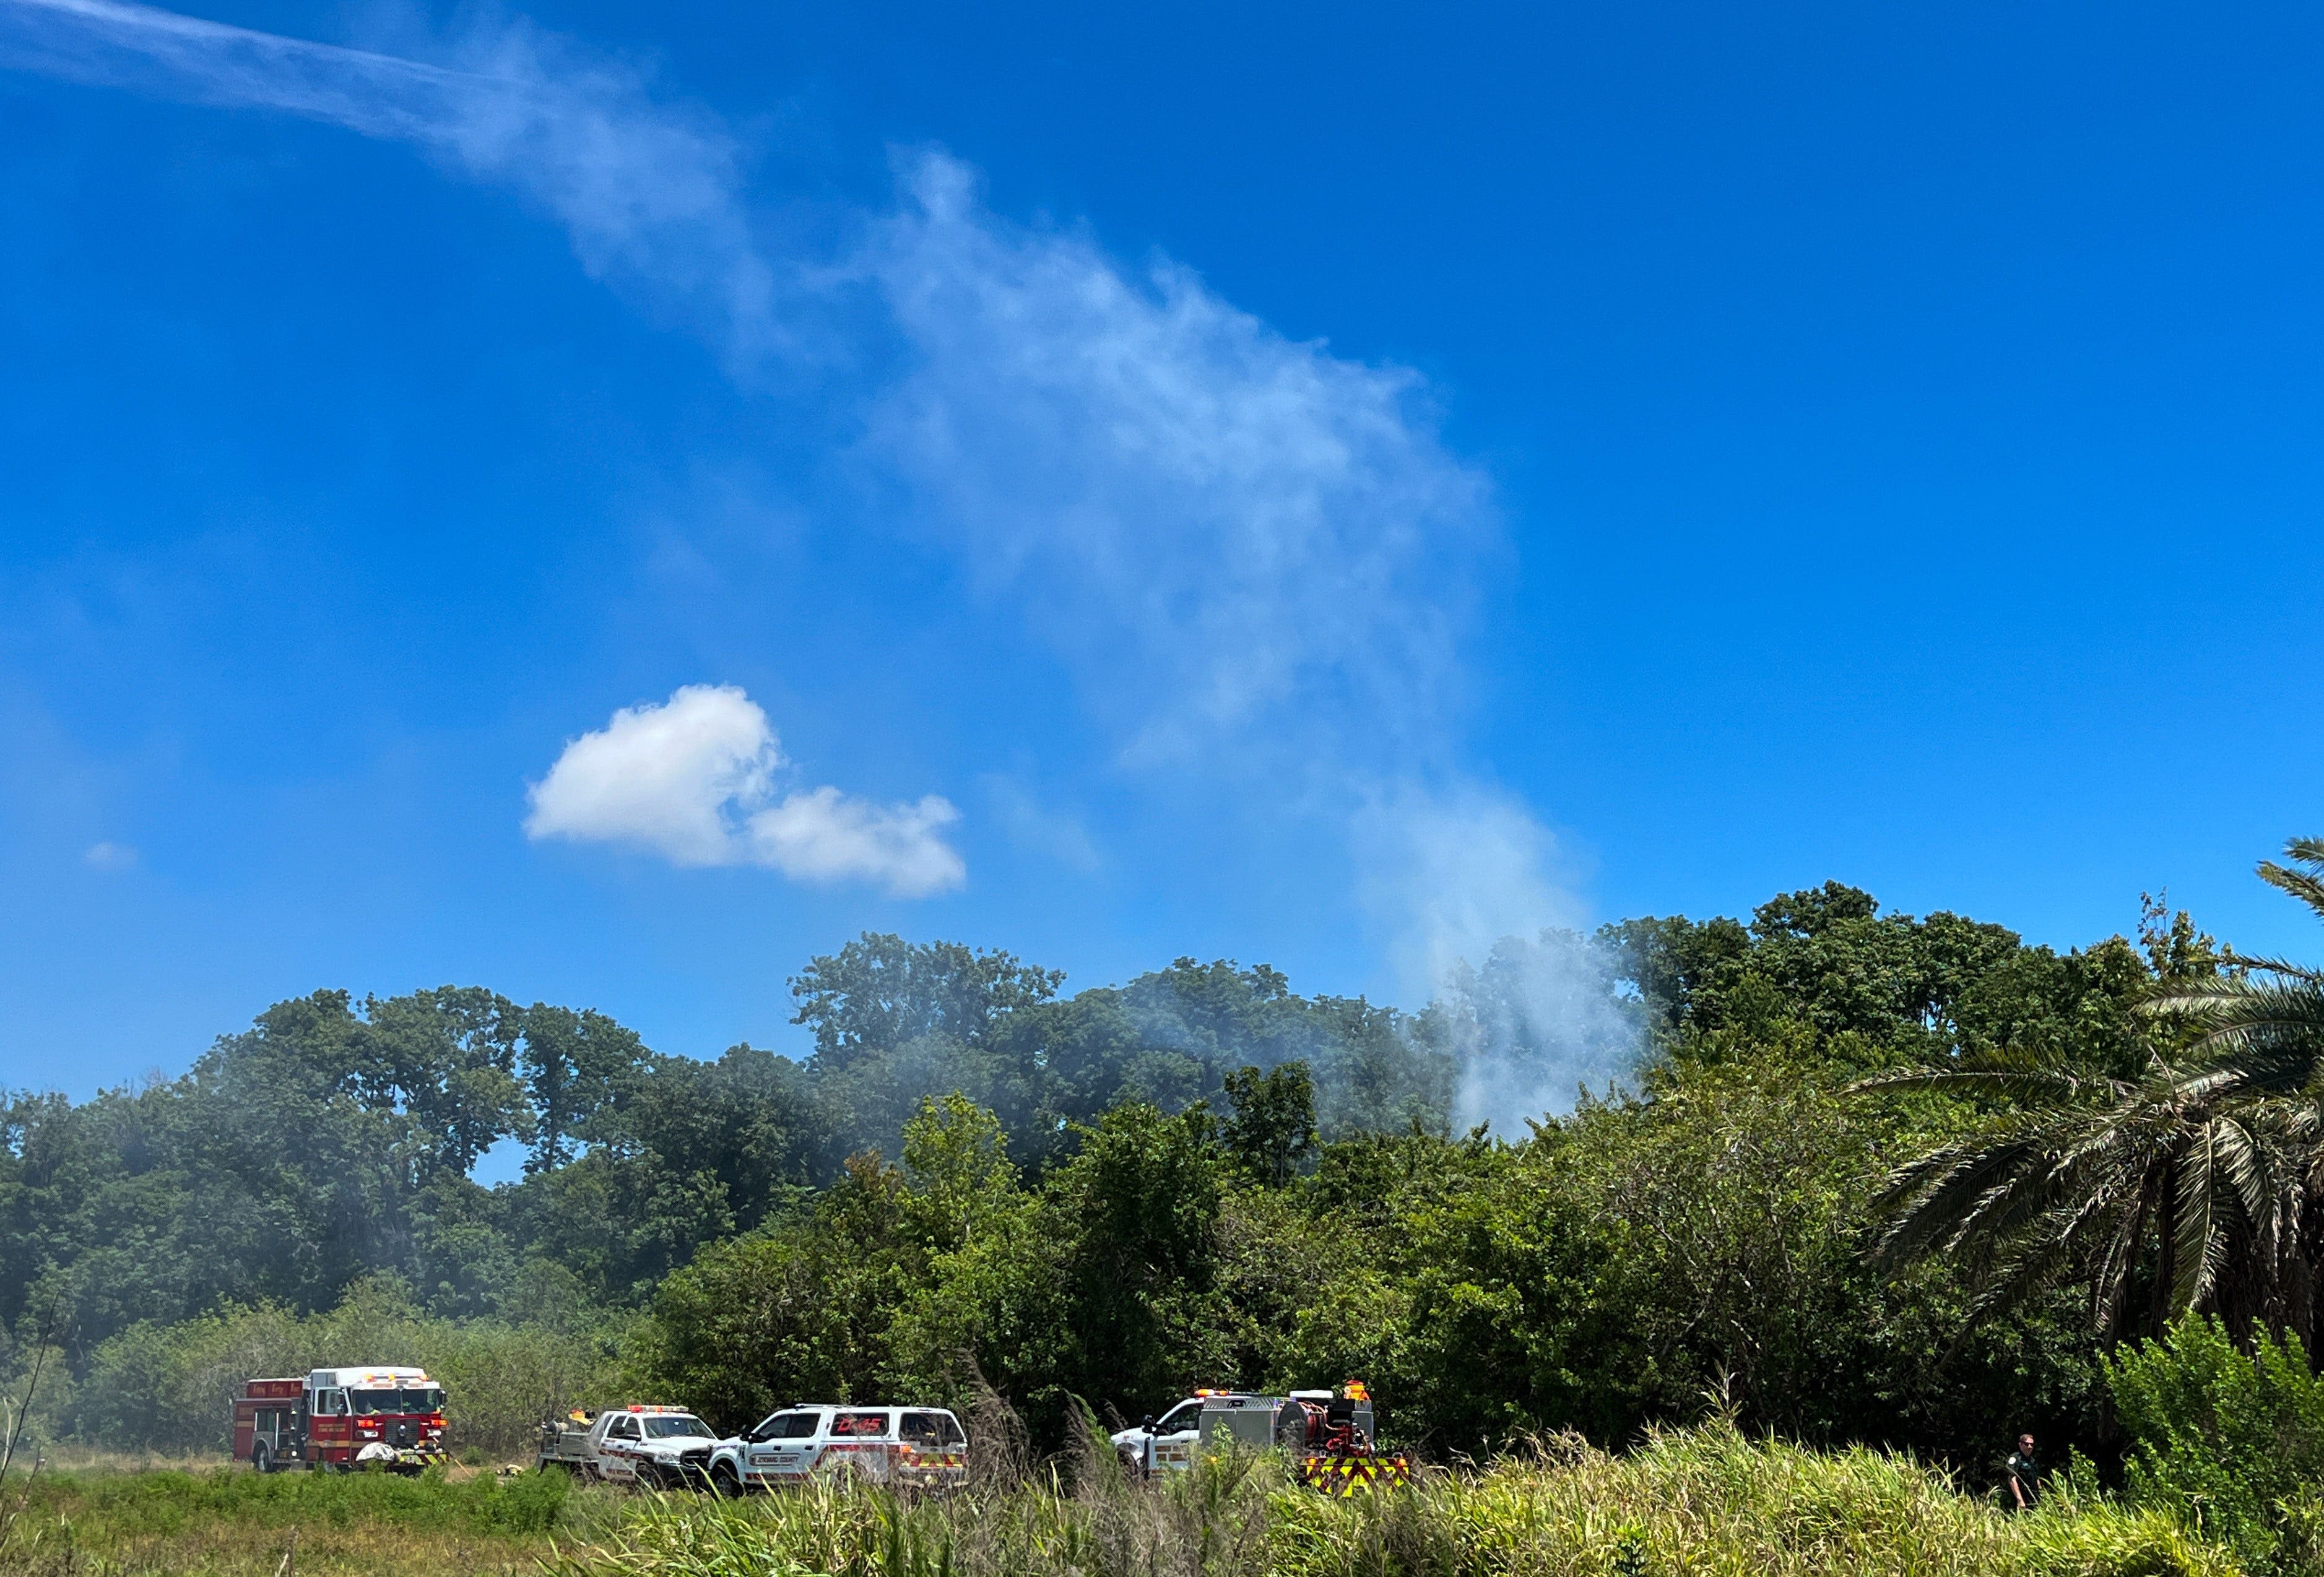 Brevard fire crews respond to reports of explosion, fire in homeless camp